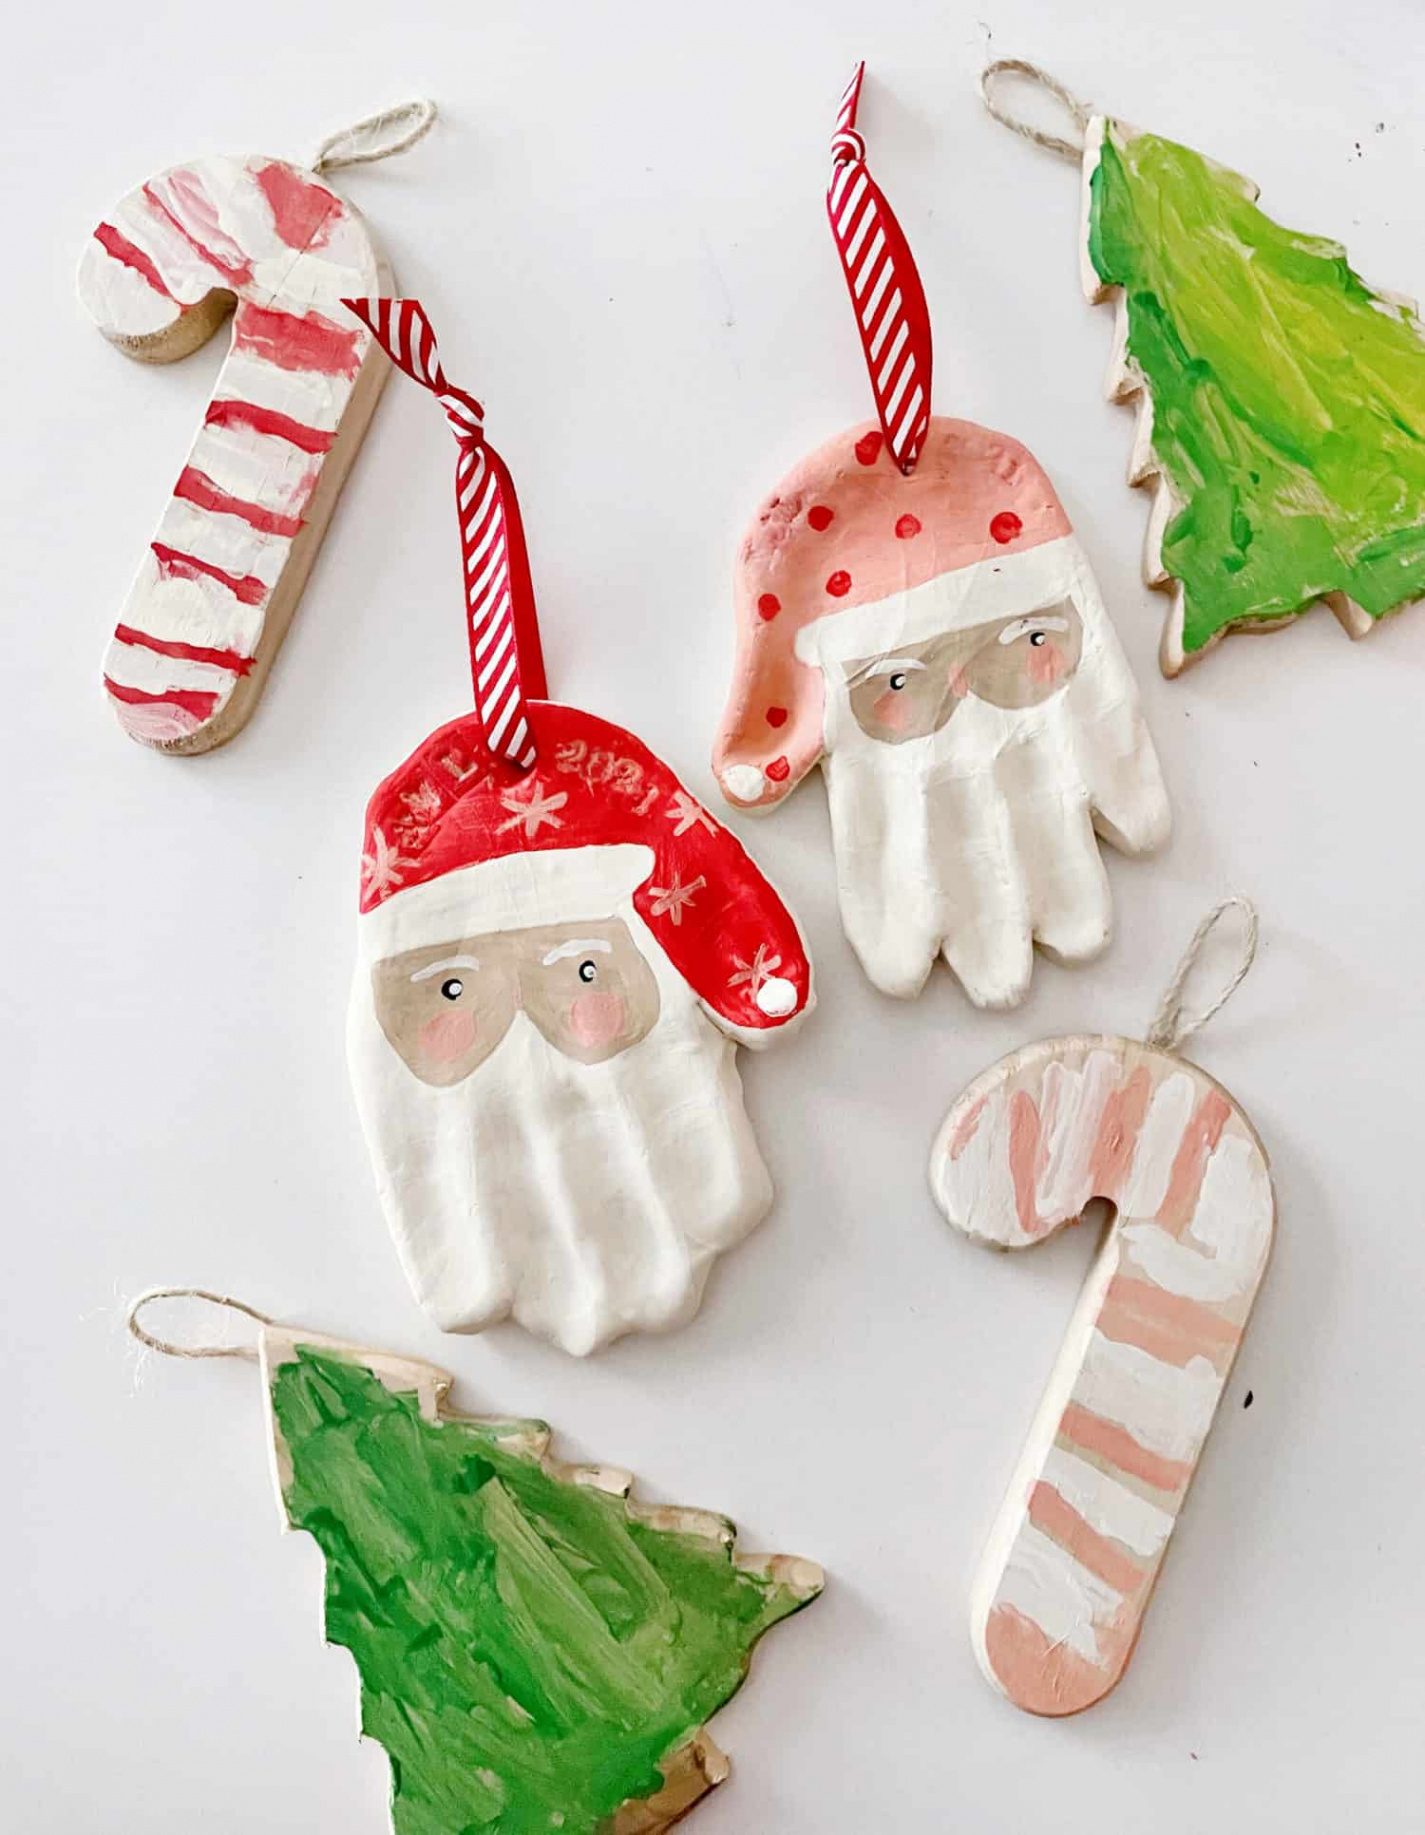 Easy Ornaments to Make With Kids and Toddlers - A Beautiful Mess